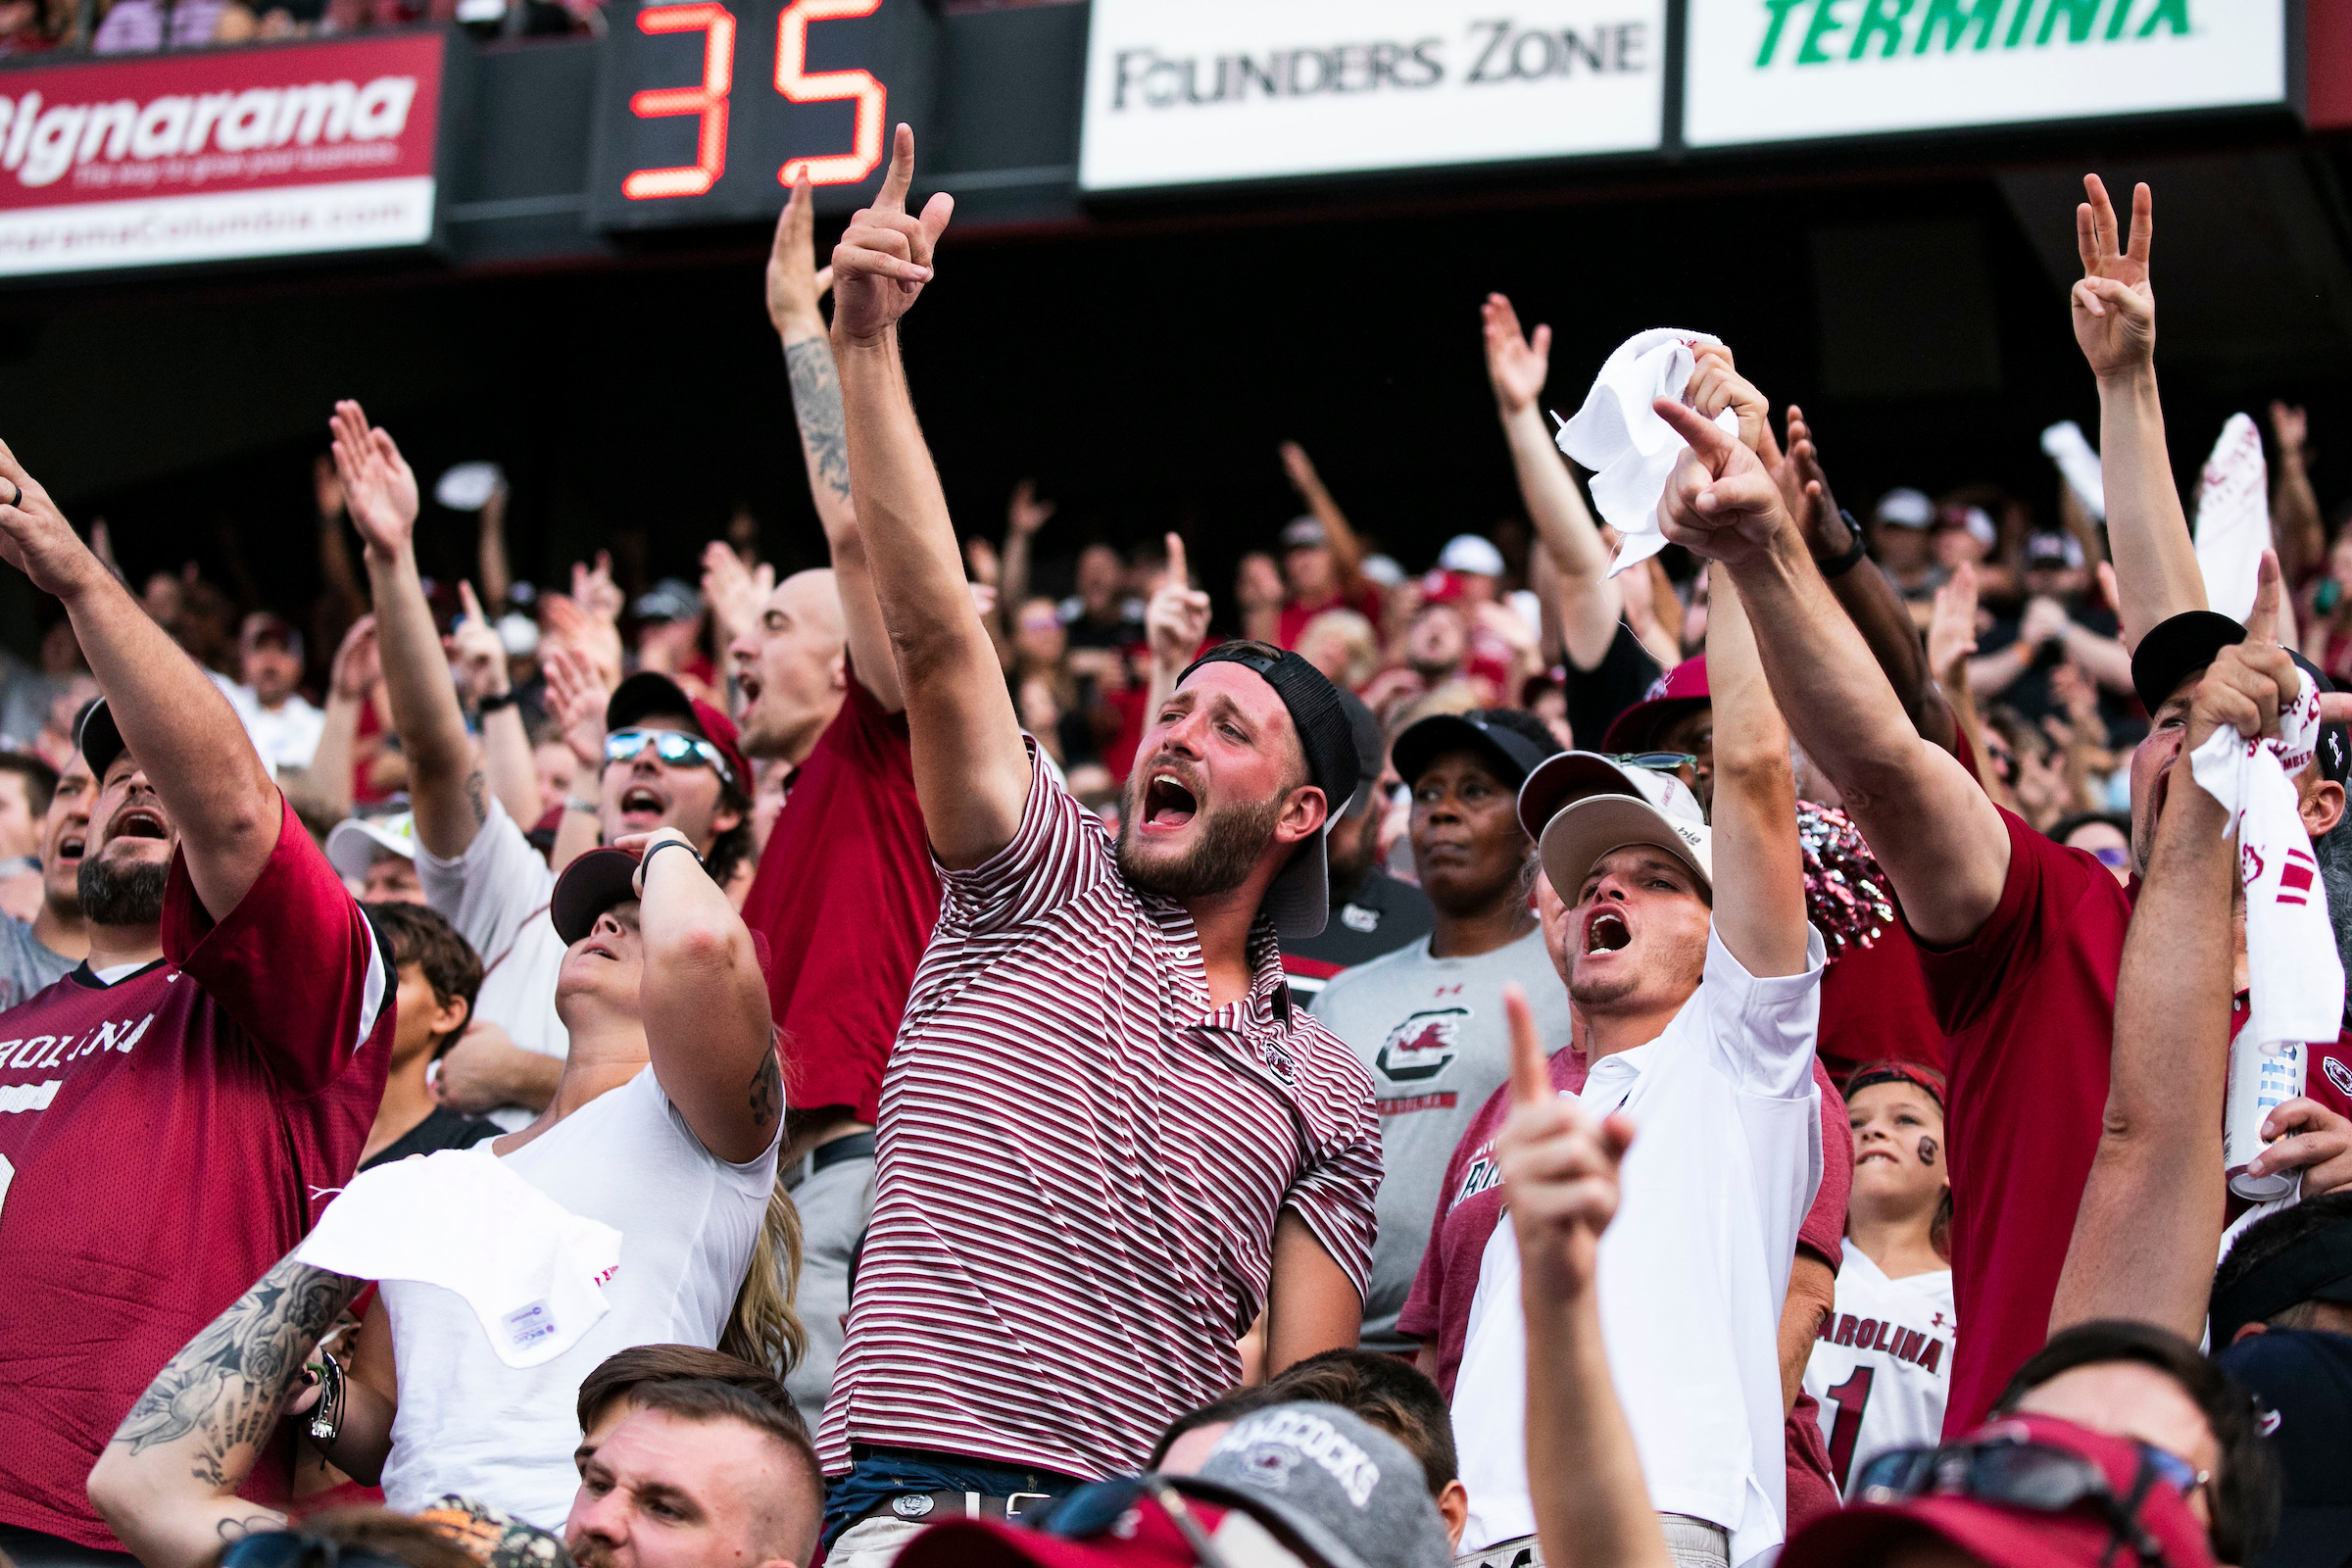 Single Game Tickets and Tailgate Packages On Sale Now to the Public